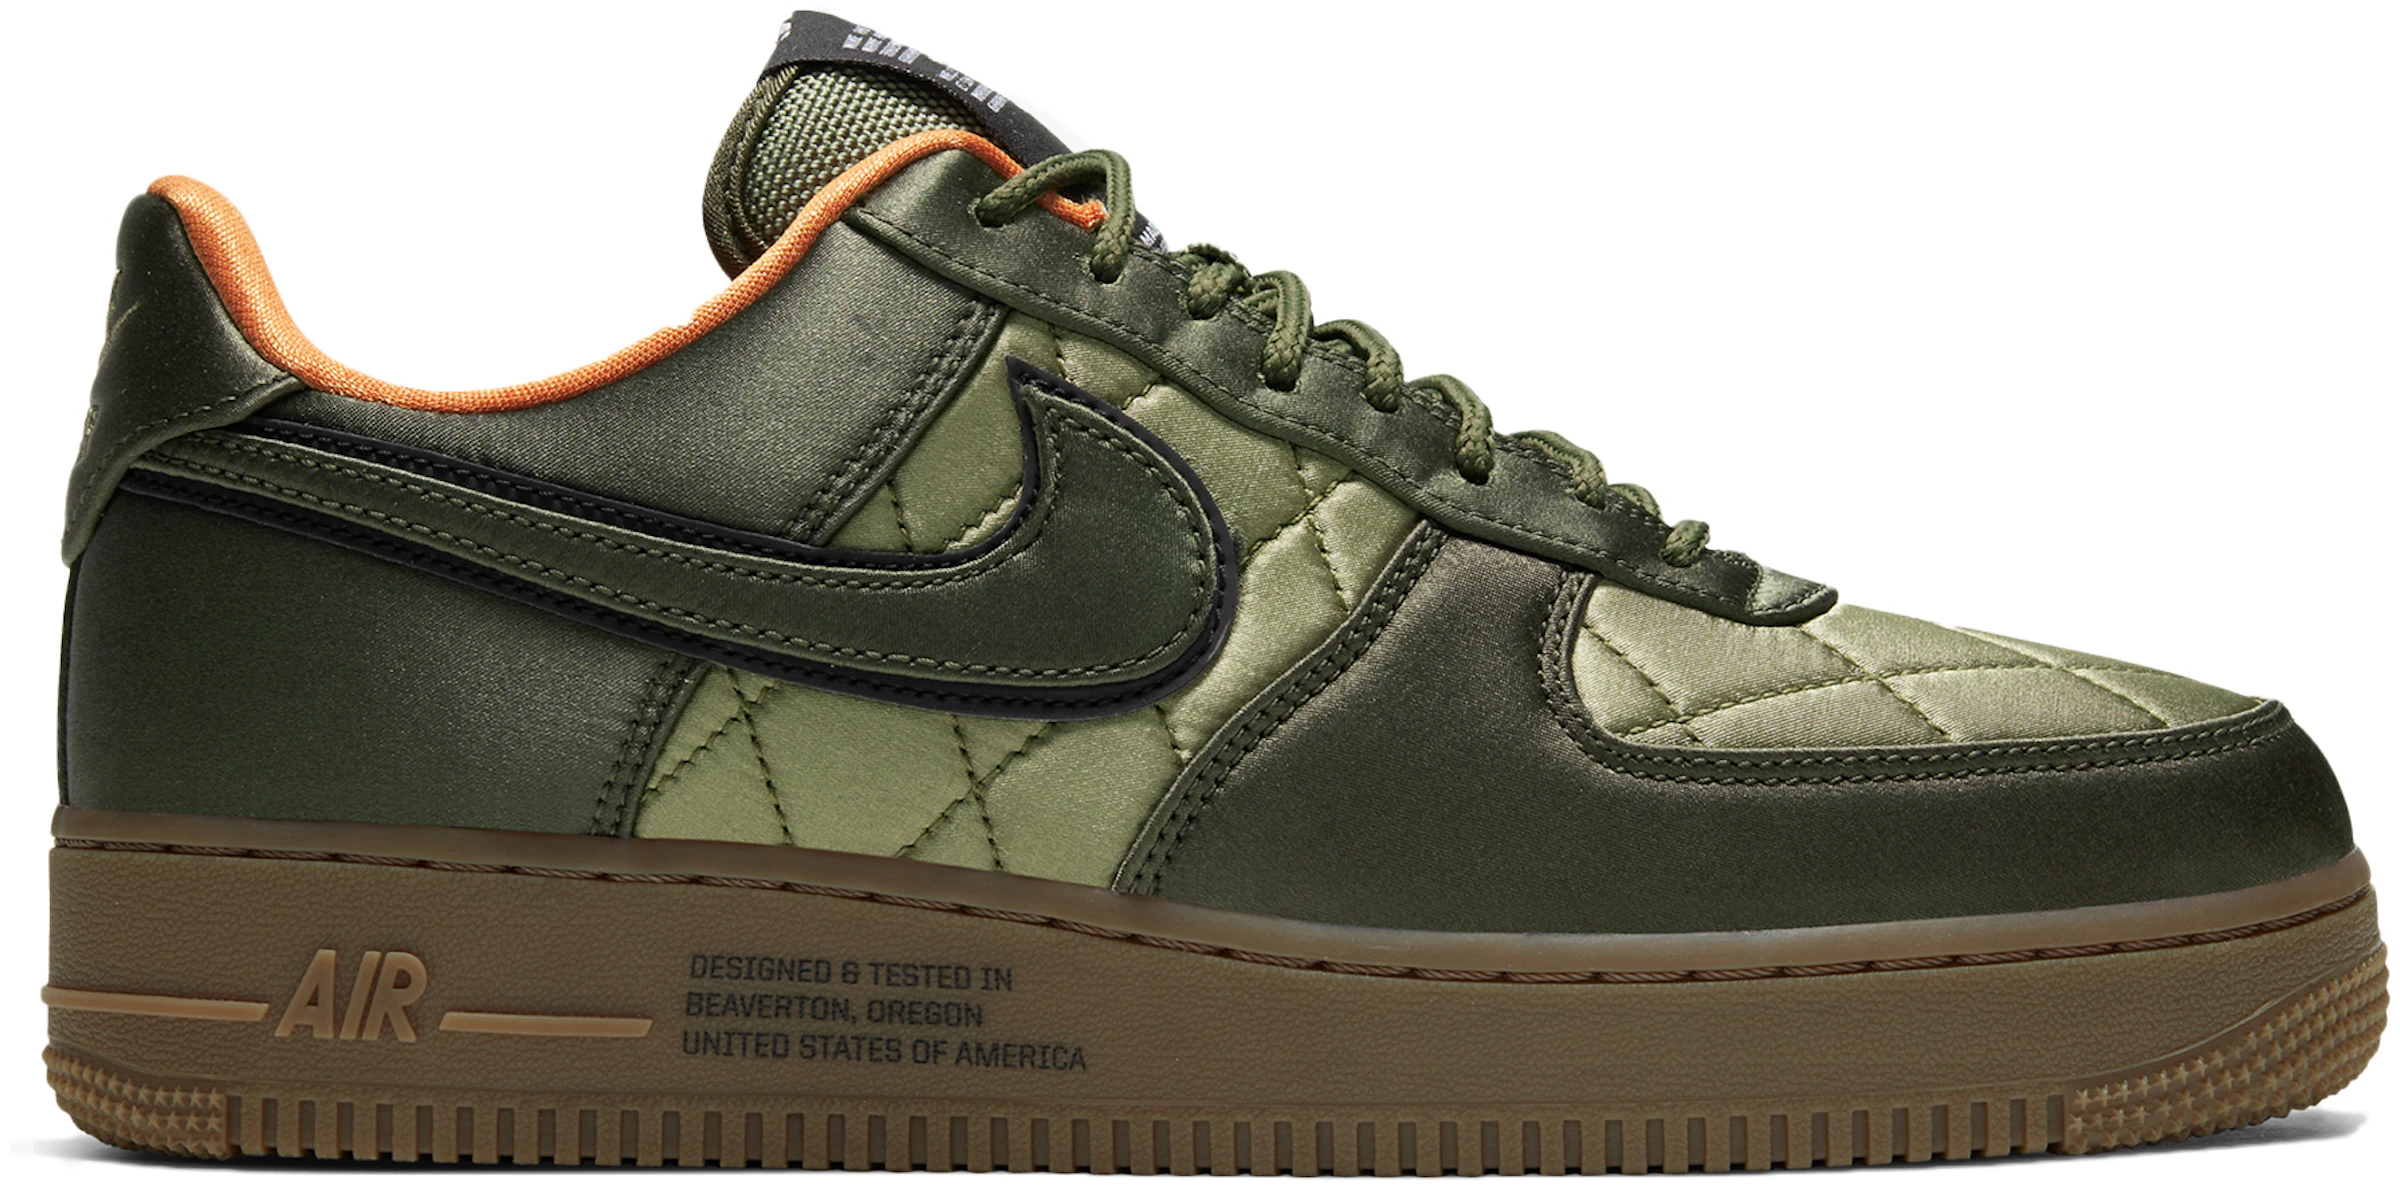 Nike Air Force 1 Low Quilted Satin Pack Cargo Khaki - CU6724-333 - CA